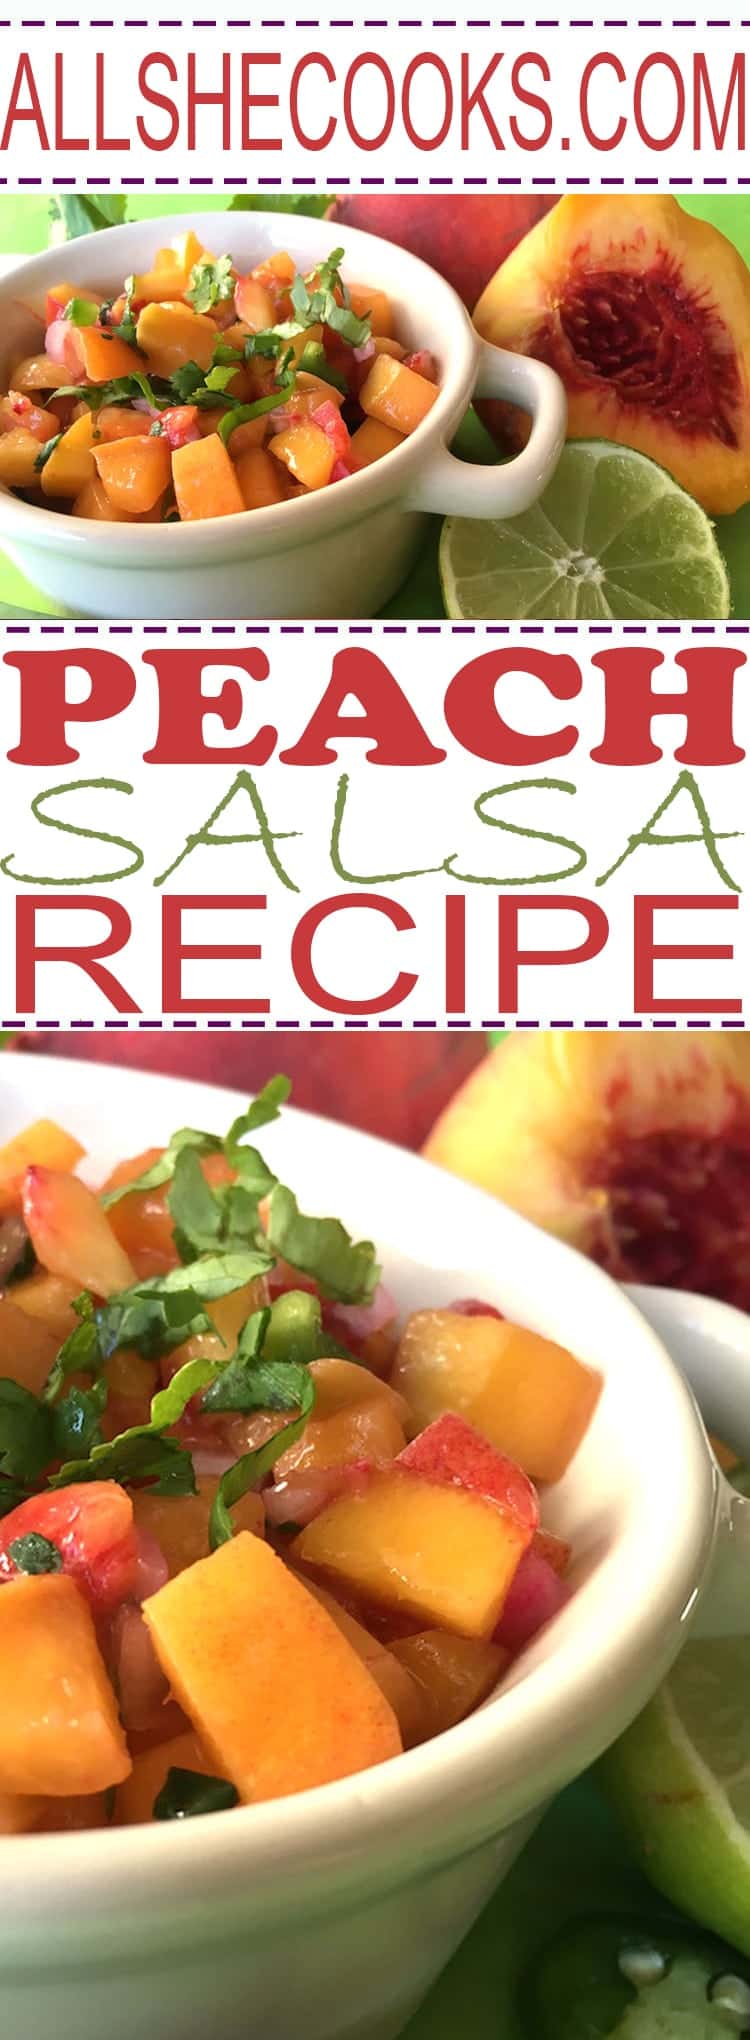 spicy peach salsa is absolutely gorgeous! The combination of colors creates a beautiful presentation, while the delicious blend of sweet and spicy flavors makes it a wonderful addition to simply prepared fish, chicken or pork dishes.